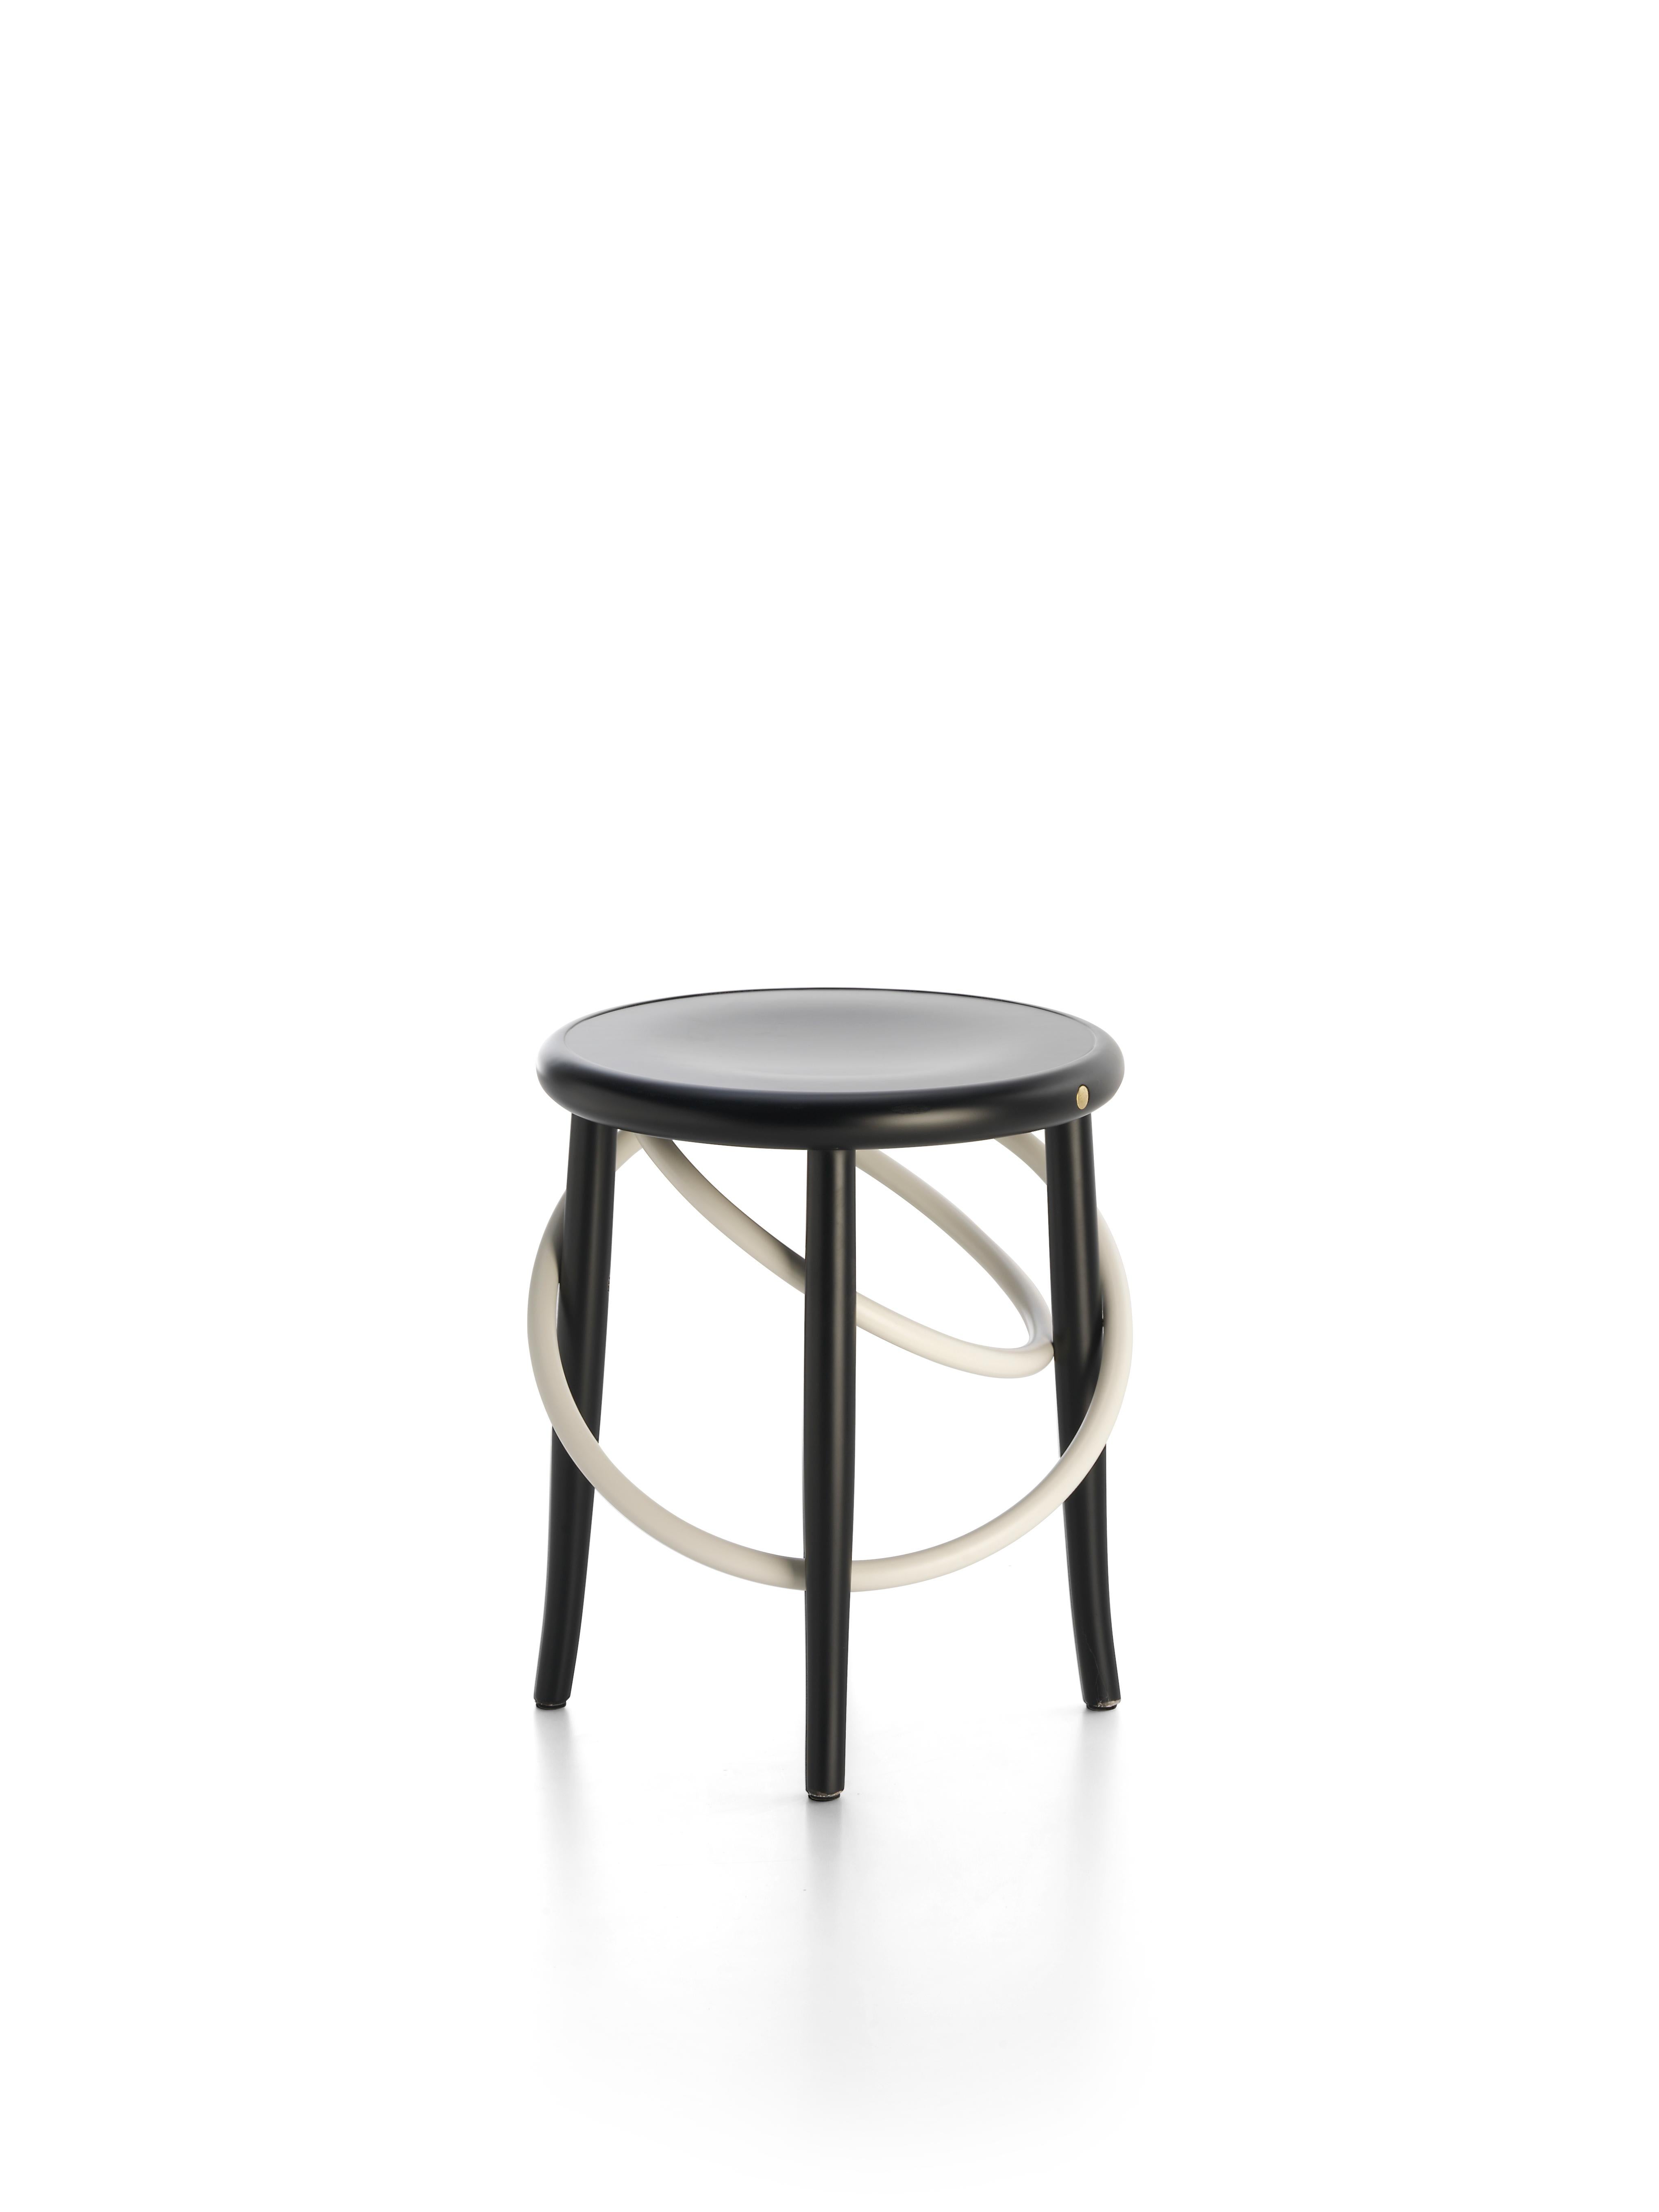 Austrian Gebrüder Thonet Vienna GmbH Cirque Two Tone Low Stool in Black with White Rings For Sale